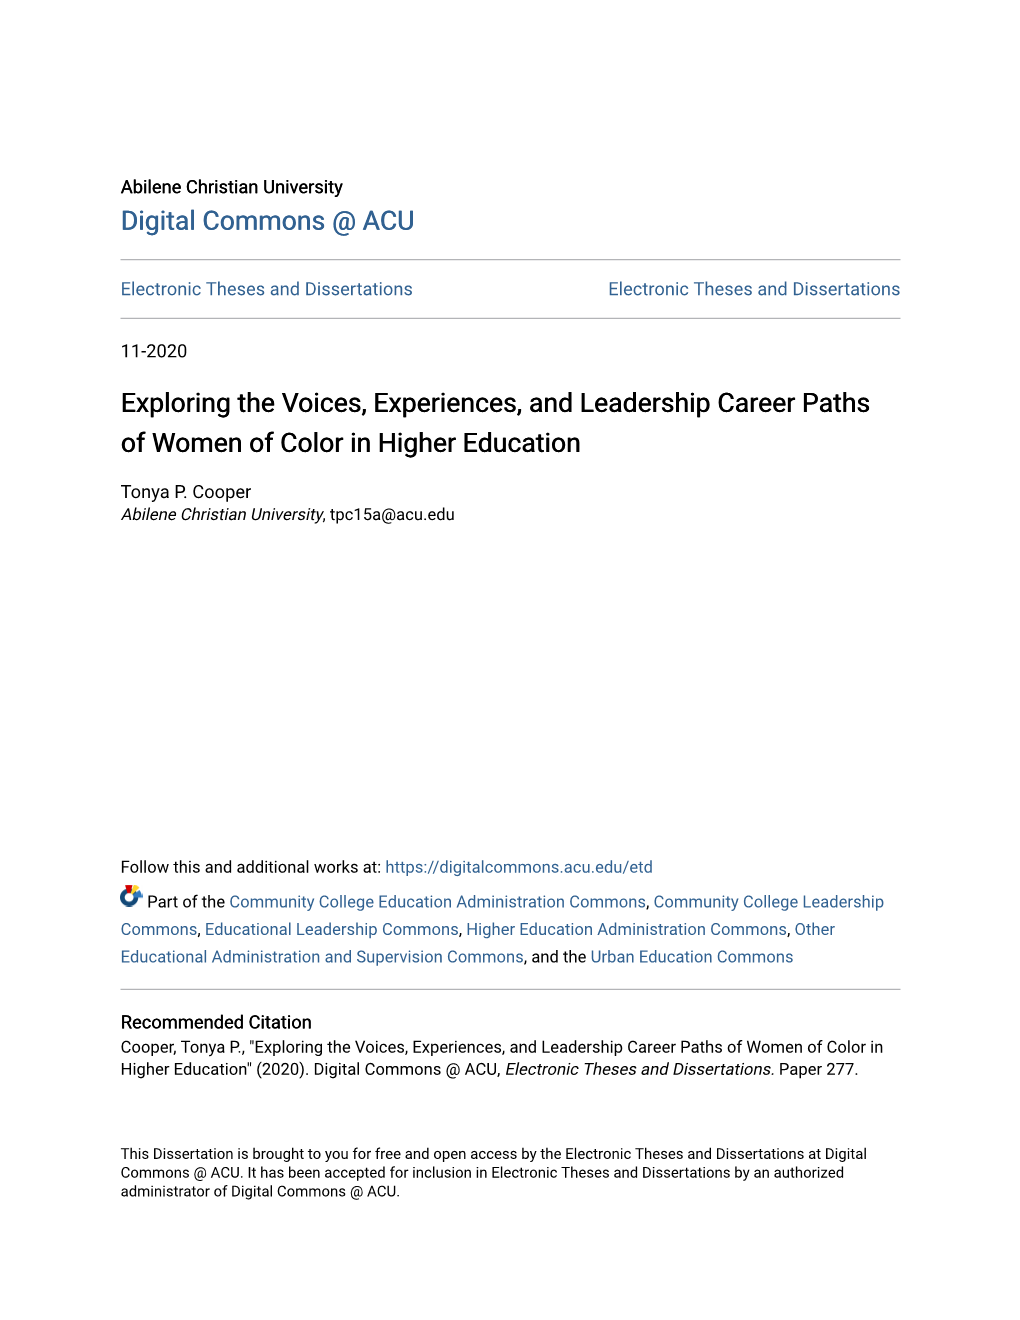 Exploring the Voices, Experiences, and Leadership Career Paths of Women of Color in Higher Education